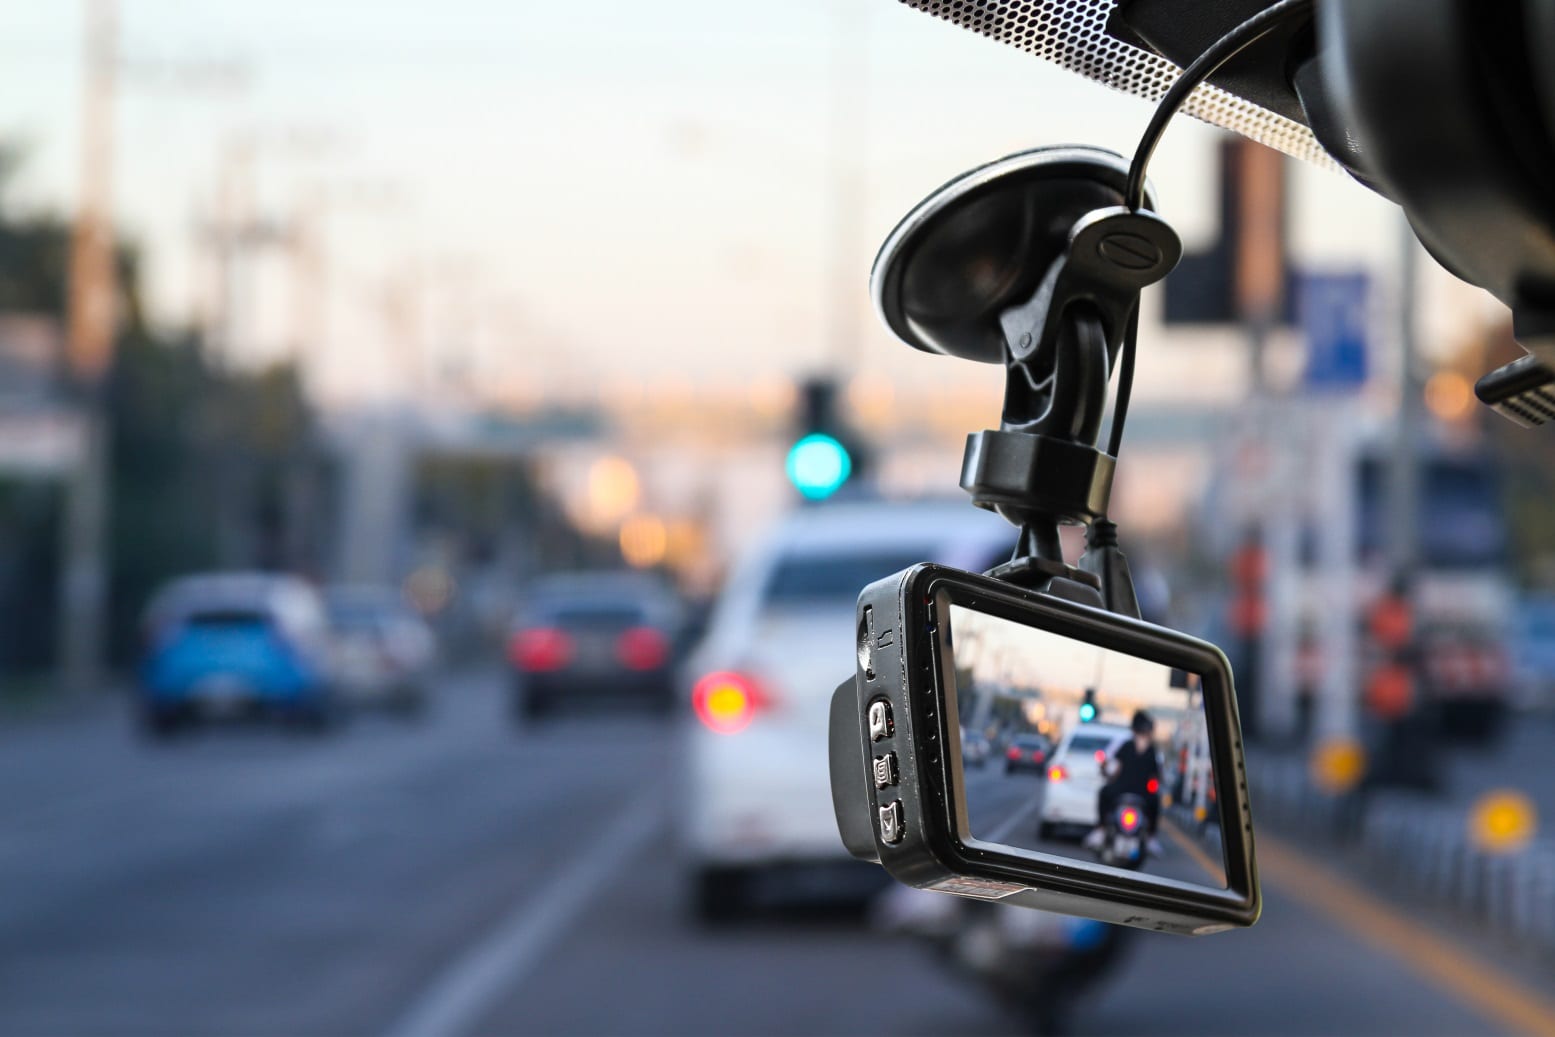 What to look for when buying a dashcam